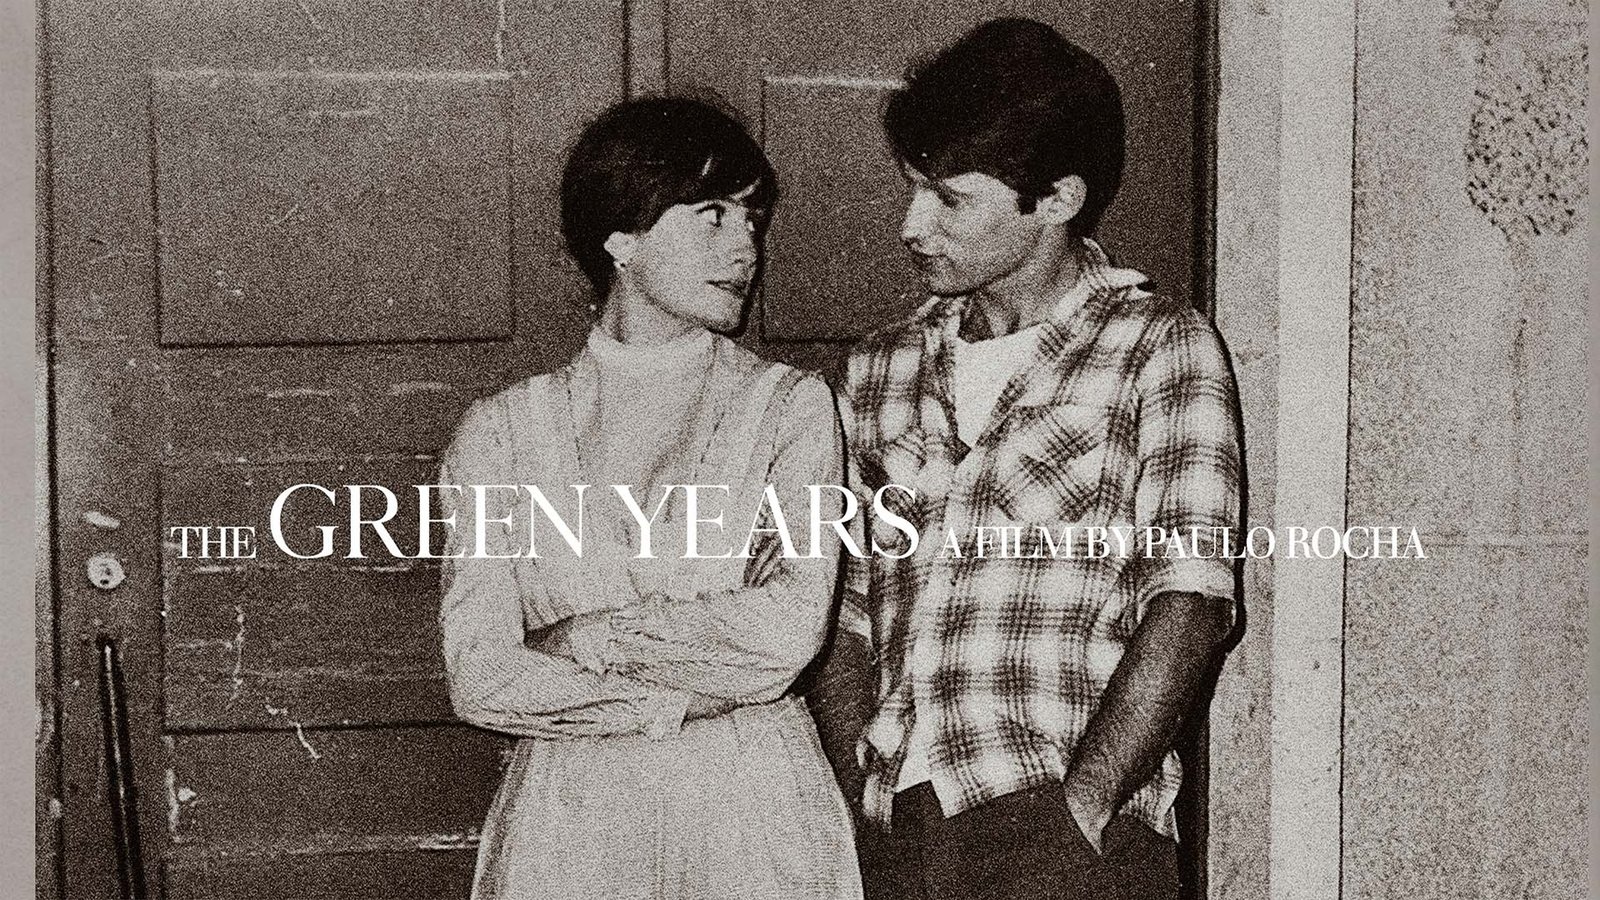 The Green Years - Os Verdes Anos